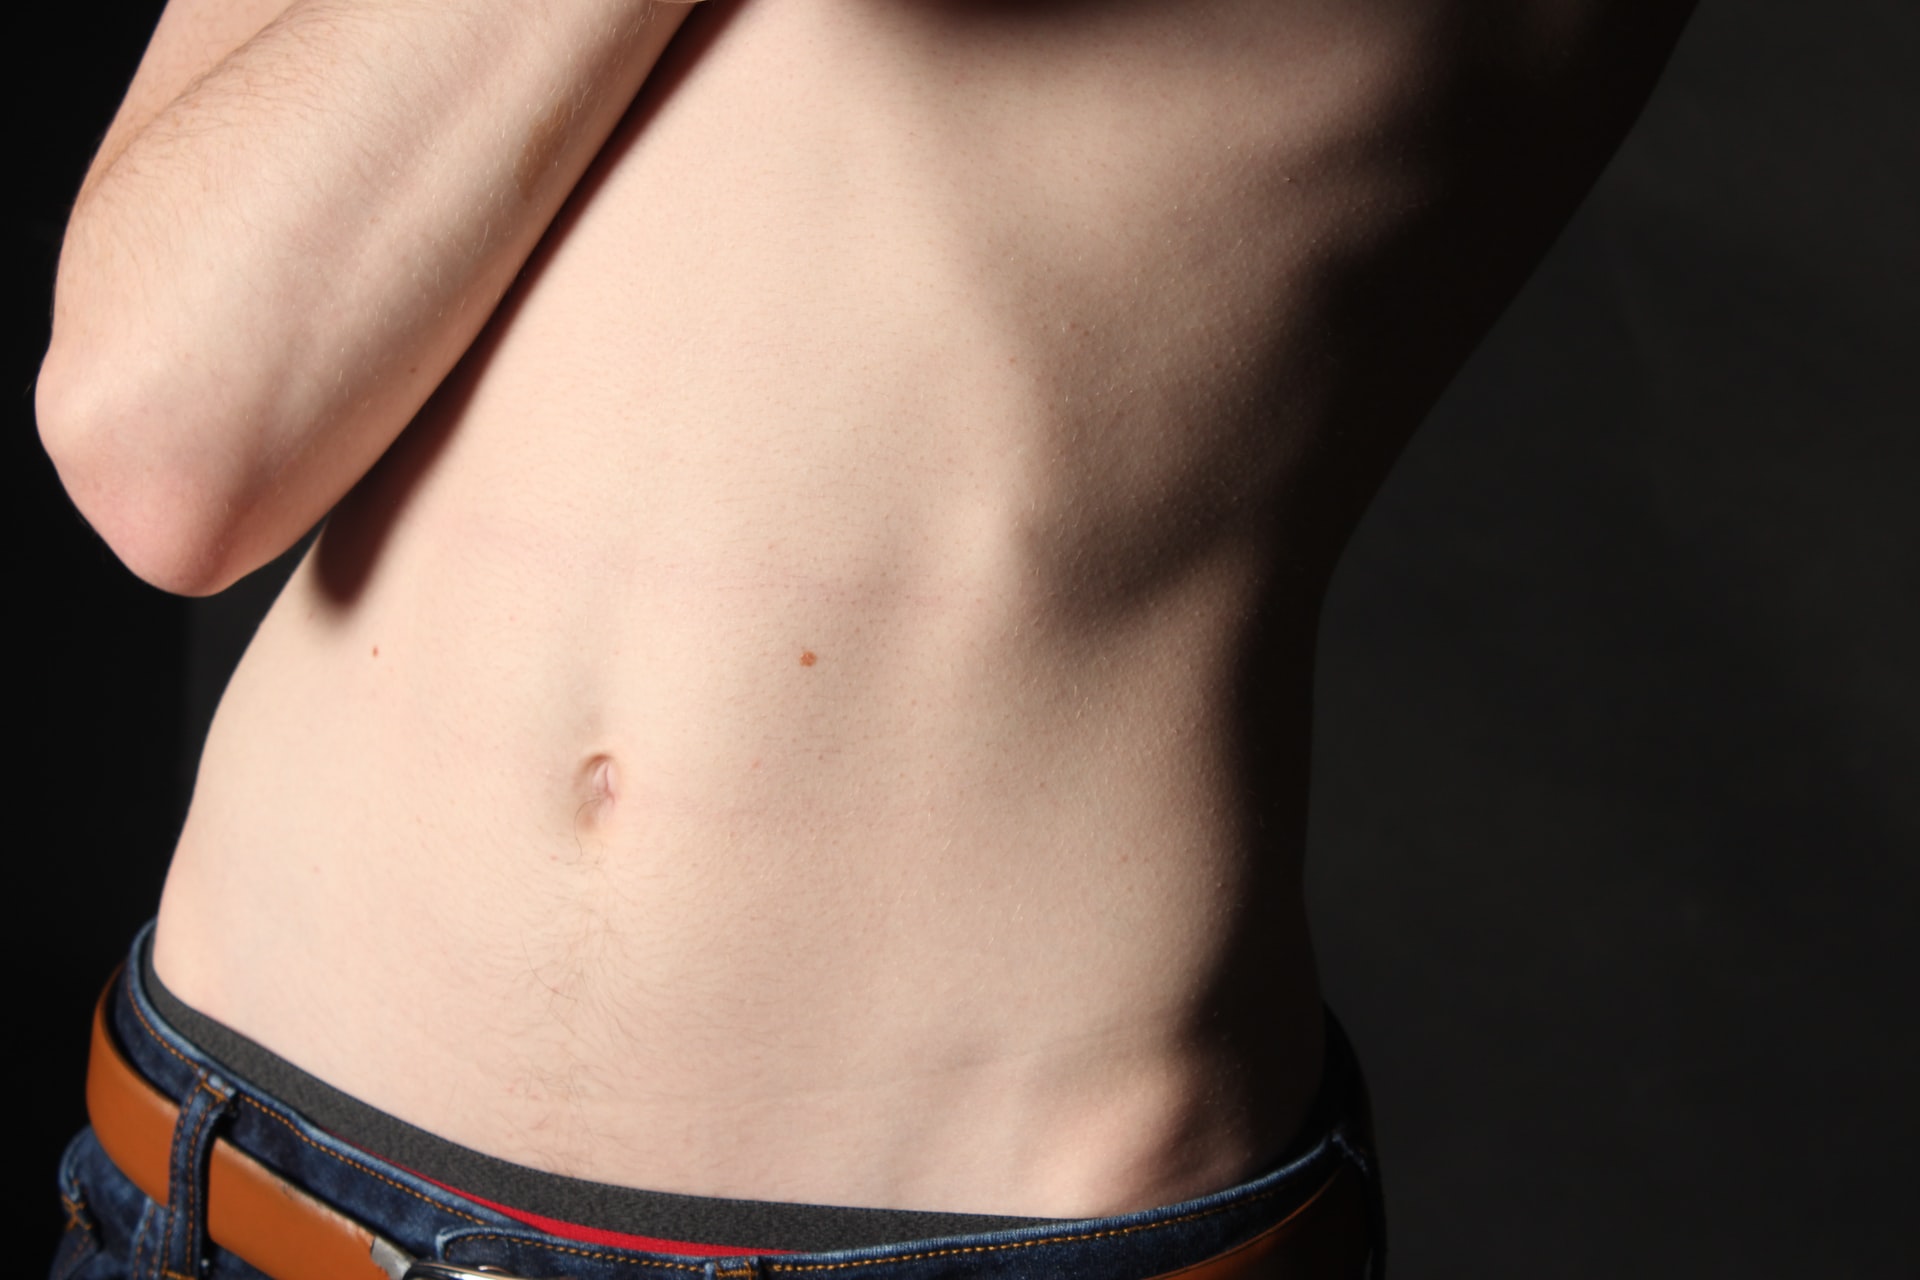 close-up of person with flat stomach, emsculpt results potential